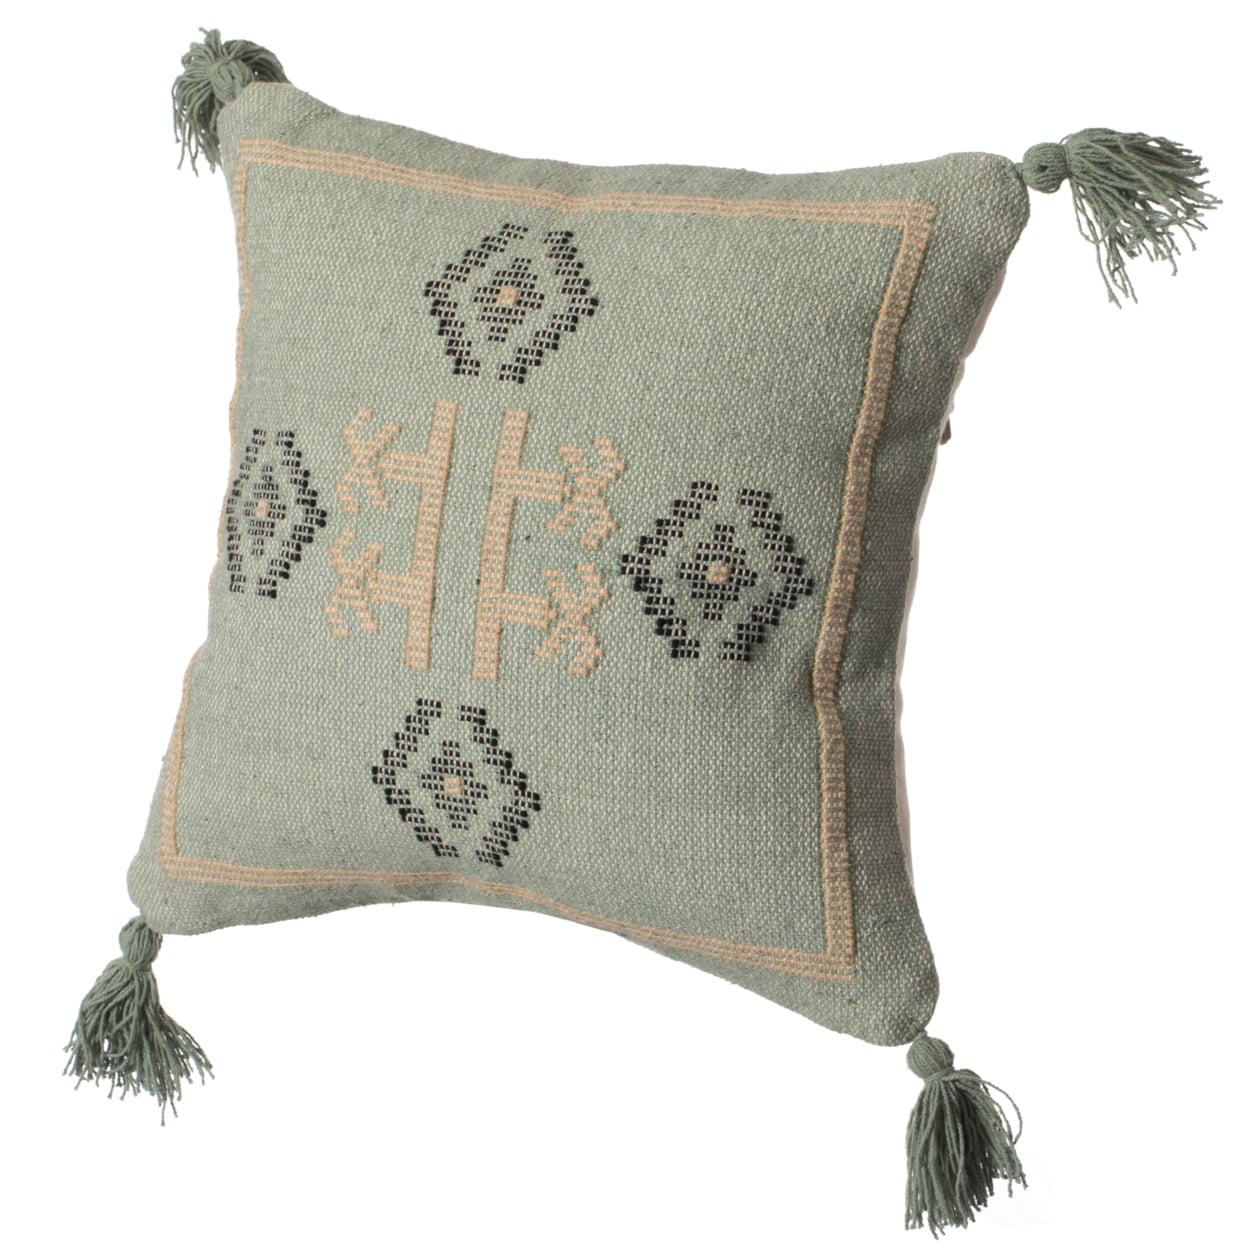 16" Green Handwoven Cotton Euro Throw Pillow with Tassel Corners